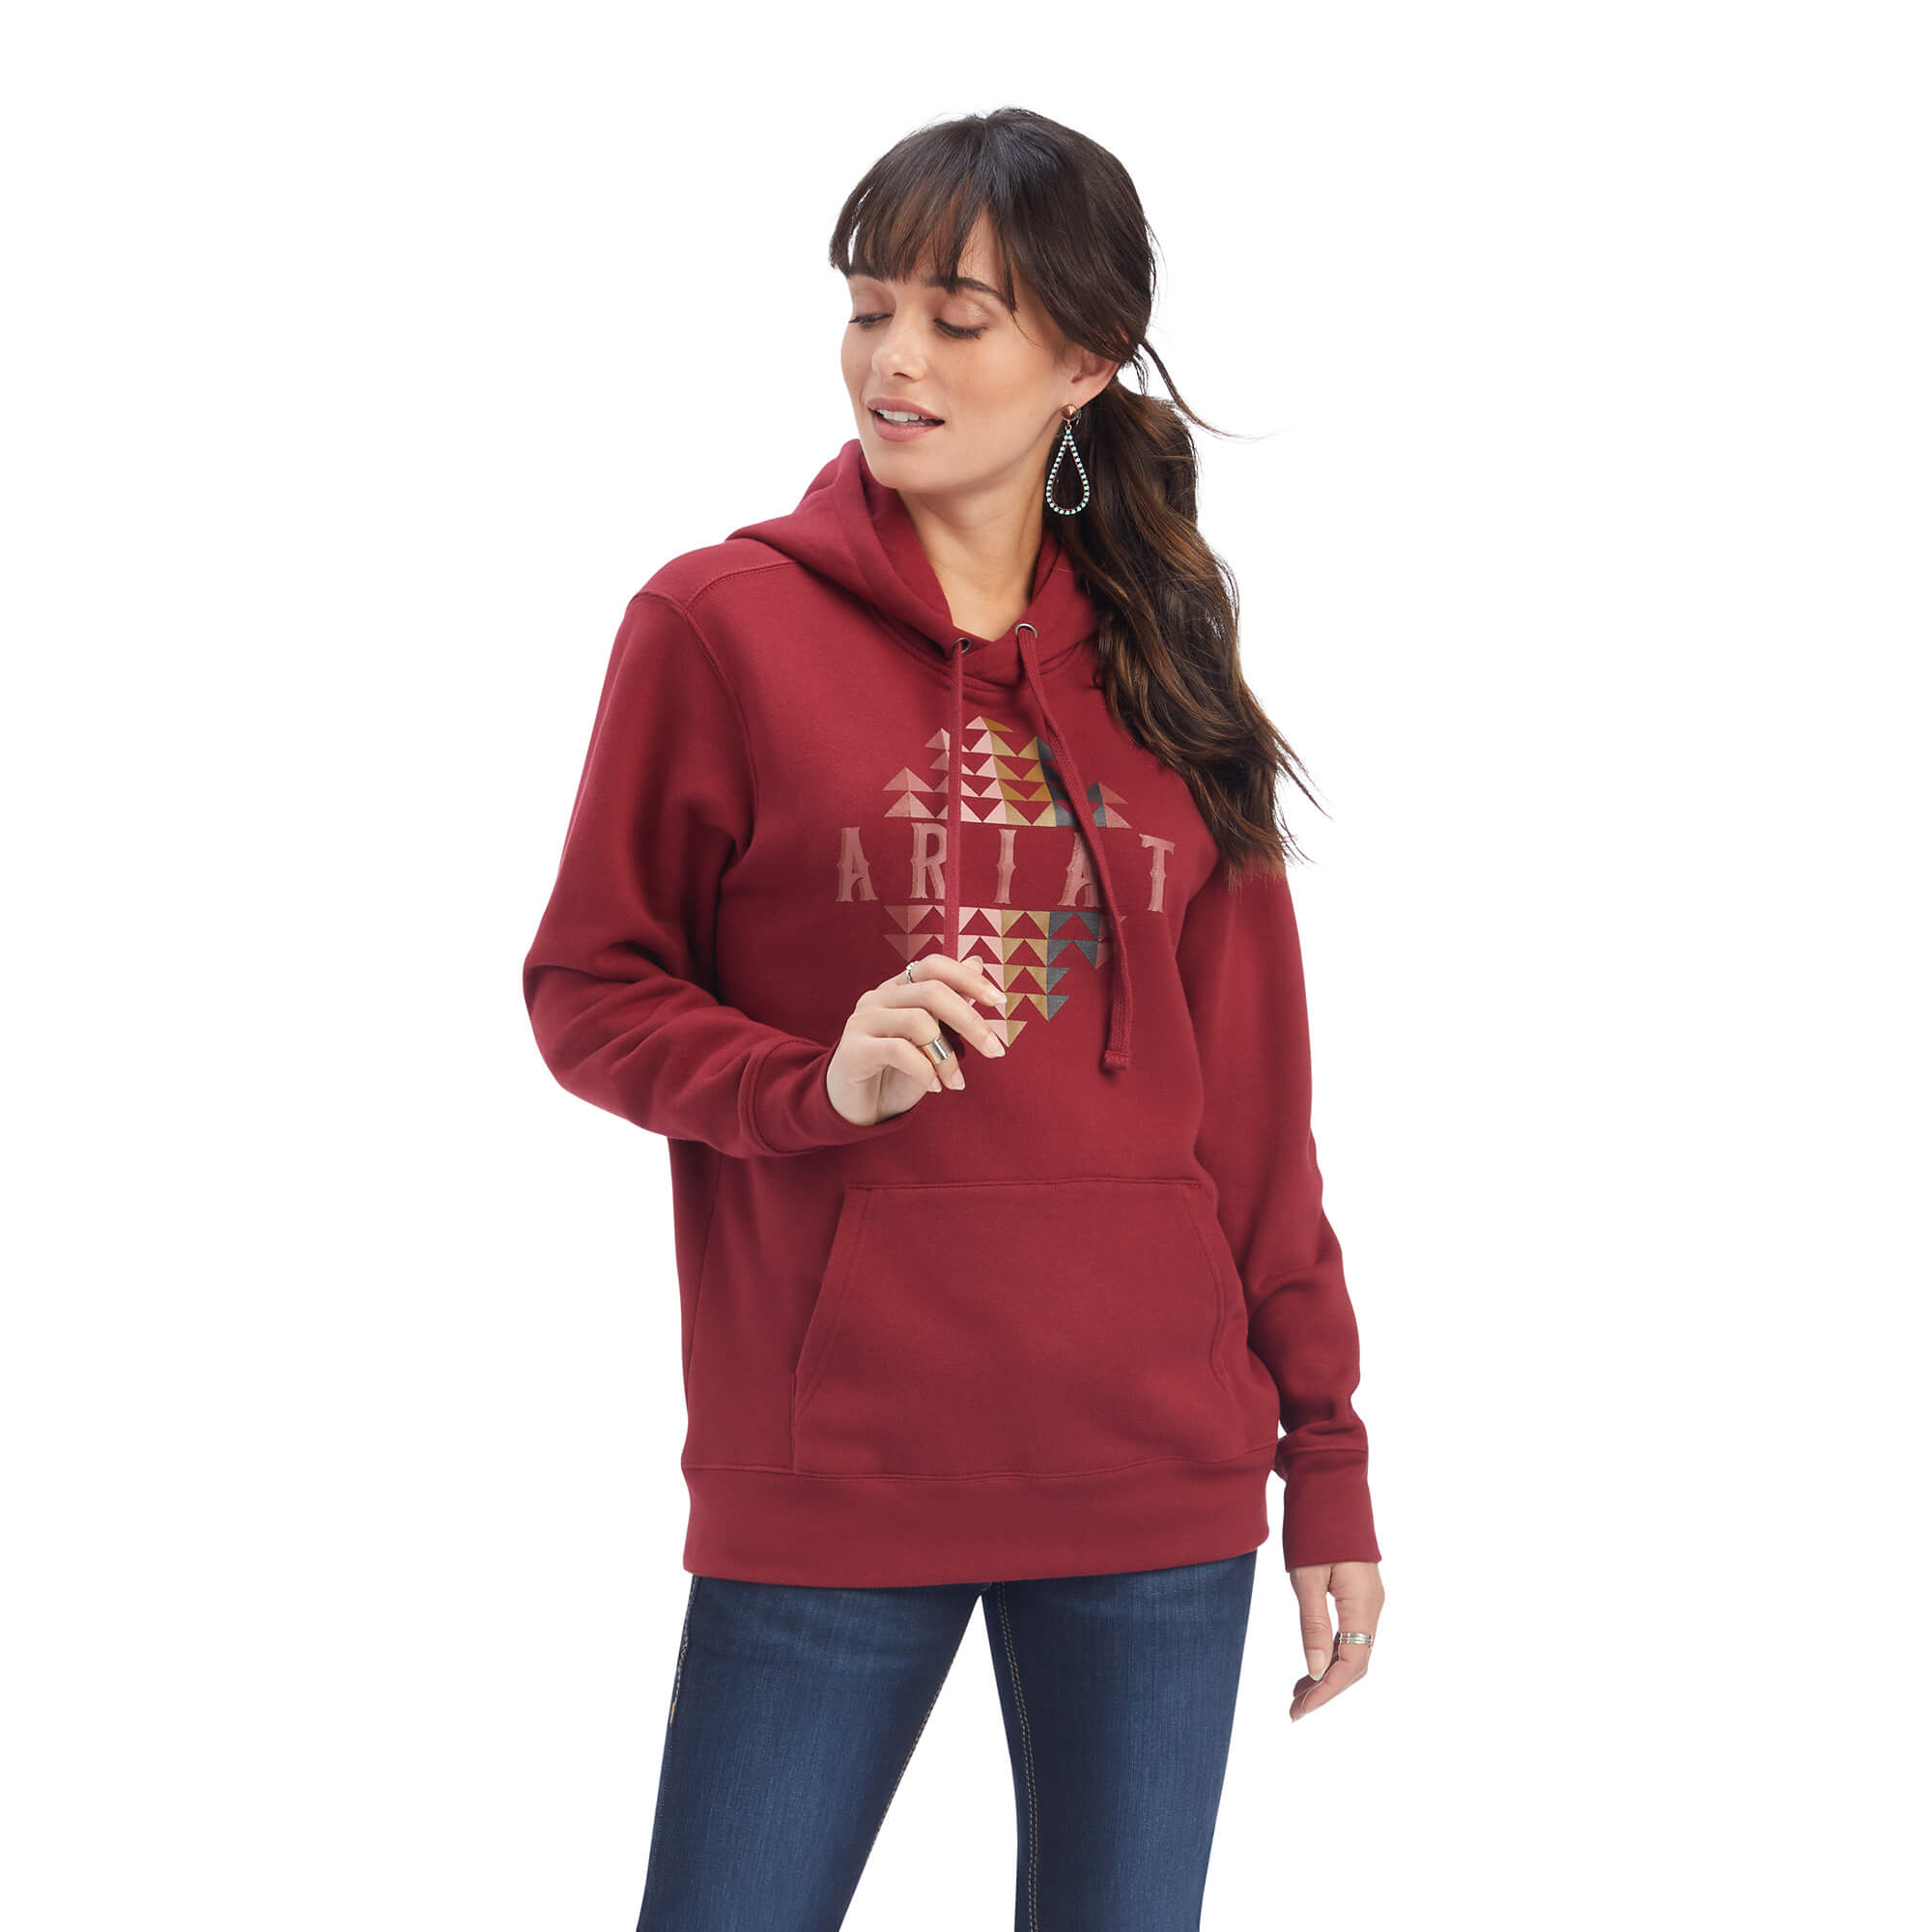 Ariat Women's REAL Beartooth Graphic Hoodie